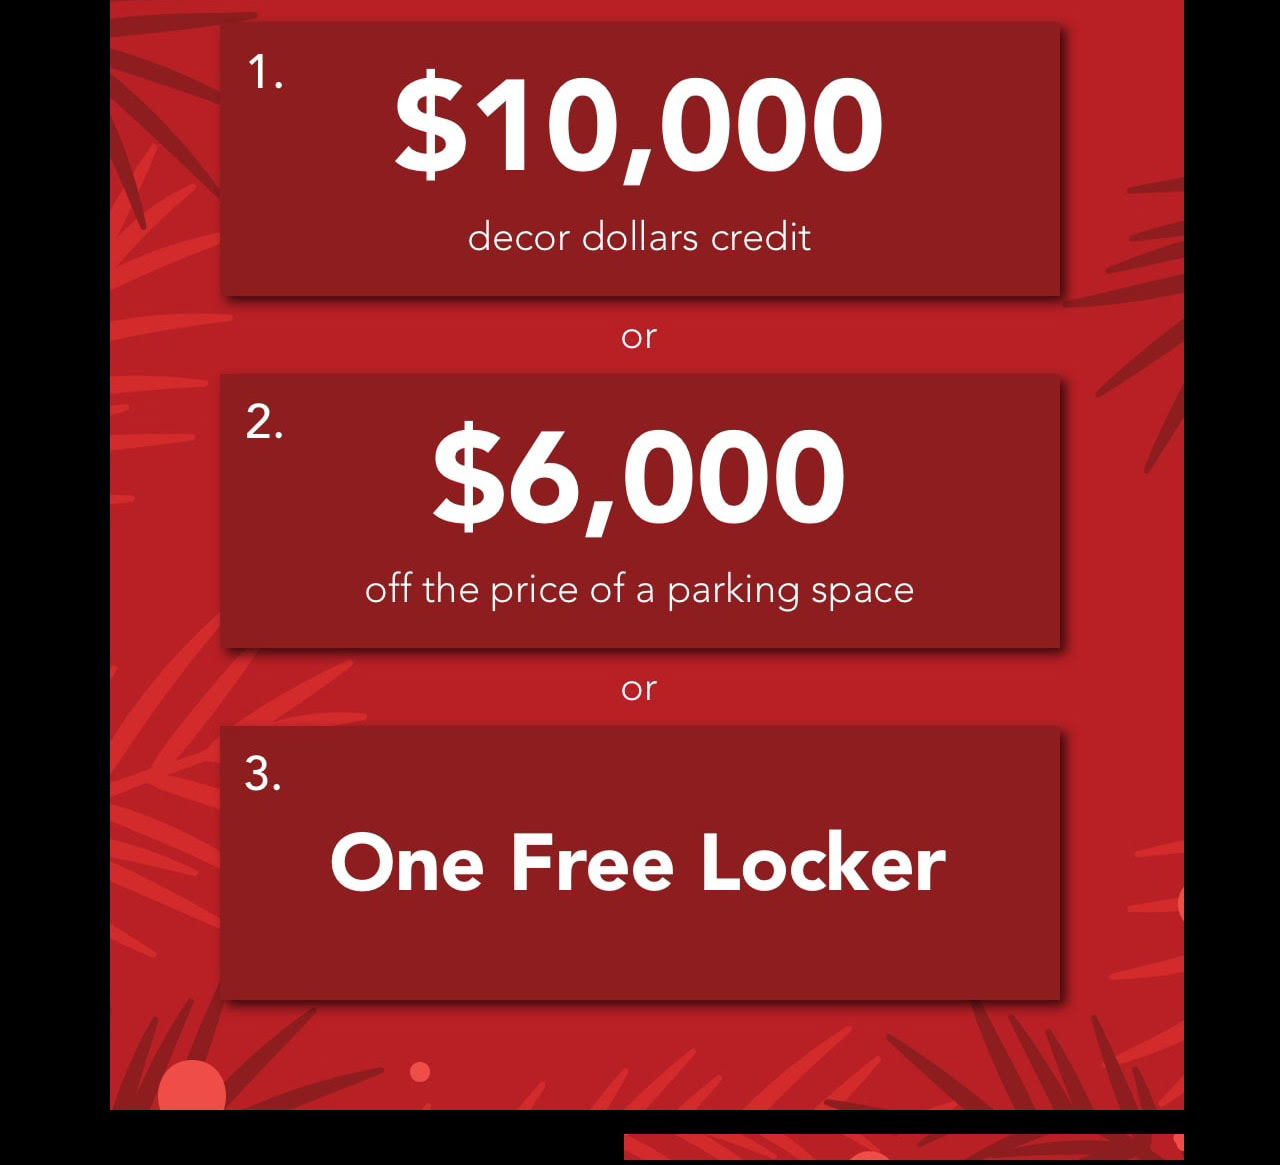 Choose your Holiday Bonus! $10,000 decor dollars credit or $6,000 off the price of a parking space or one free locker!